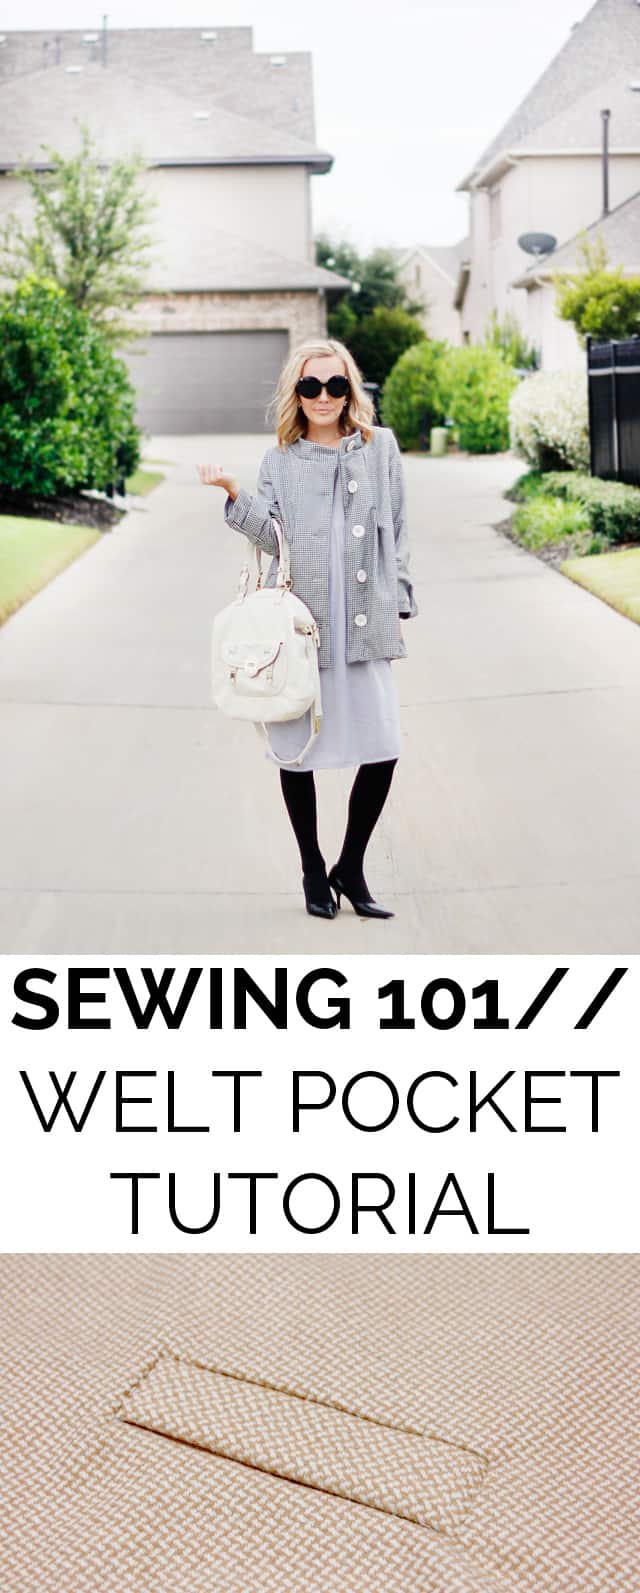 WELT POCKET TUTORIAL | sewing 101 | how to sew a welt pocket | sewing tips and tricks | sewing tutorials | beginner sewing tips || See Kate Sew #sewing101 #weltpocket #sewingtutorial #beginnersewing